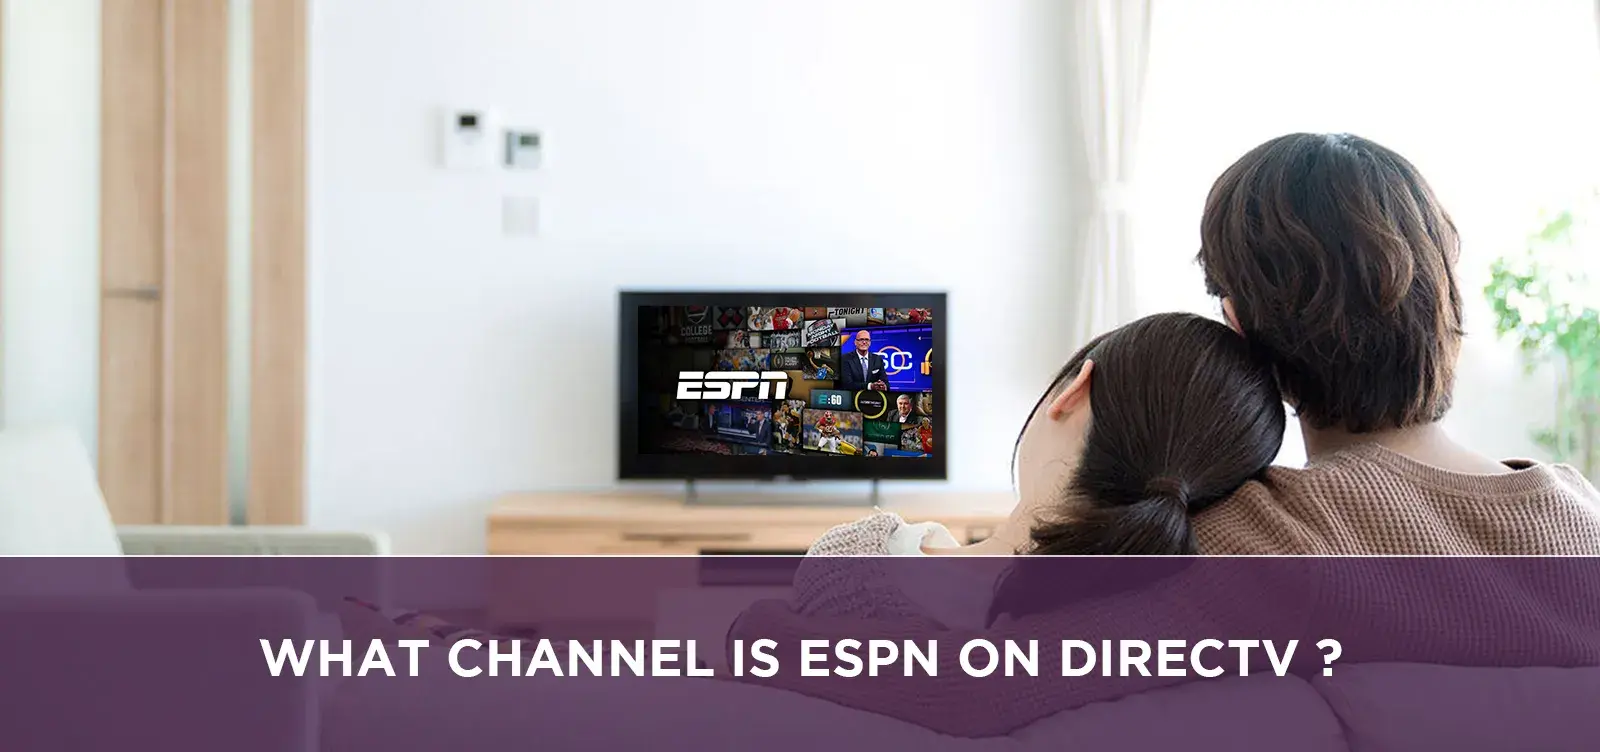 What channel is ESPN on Directv